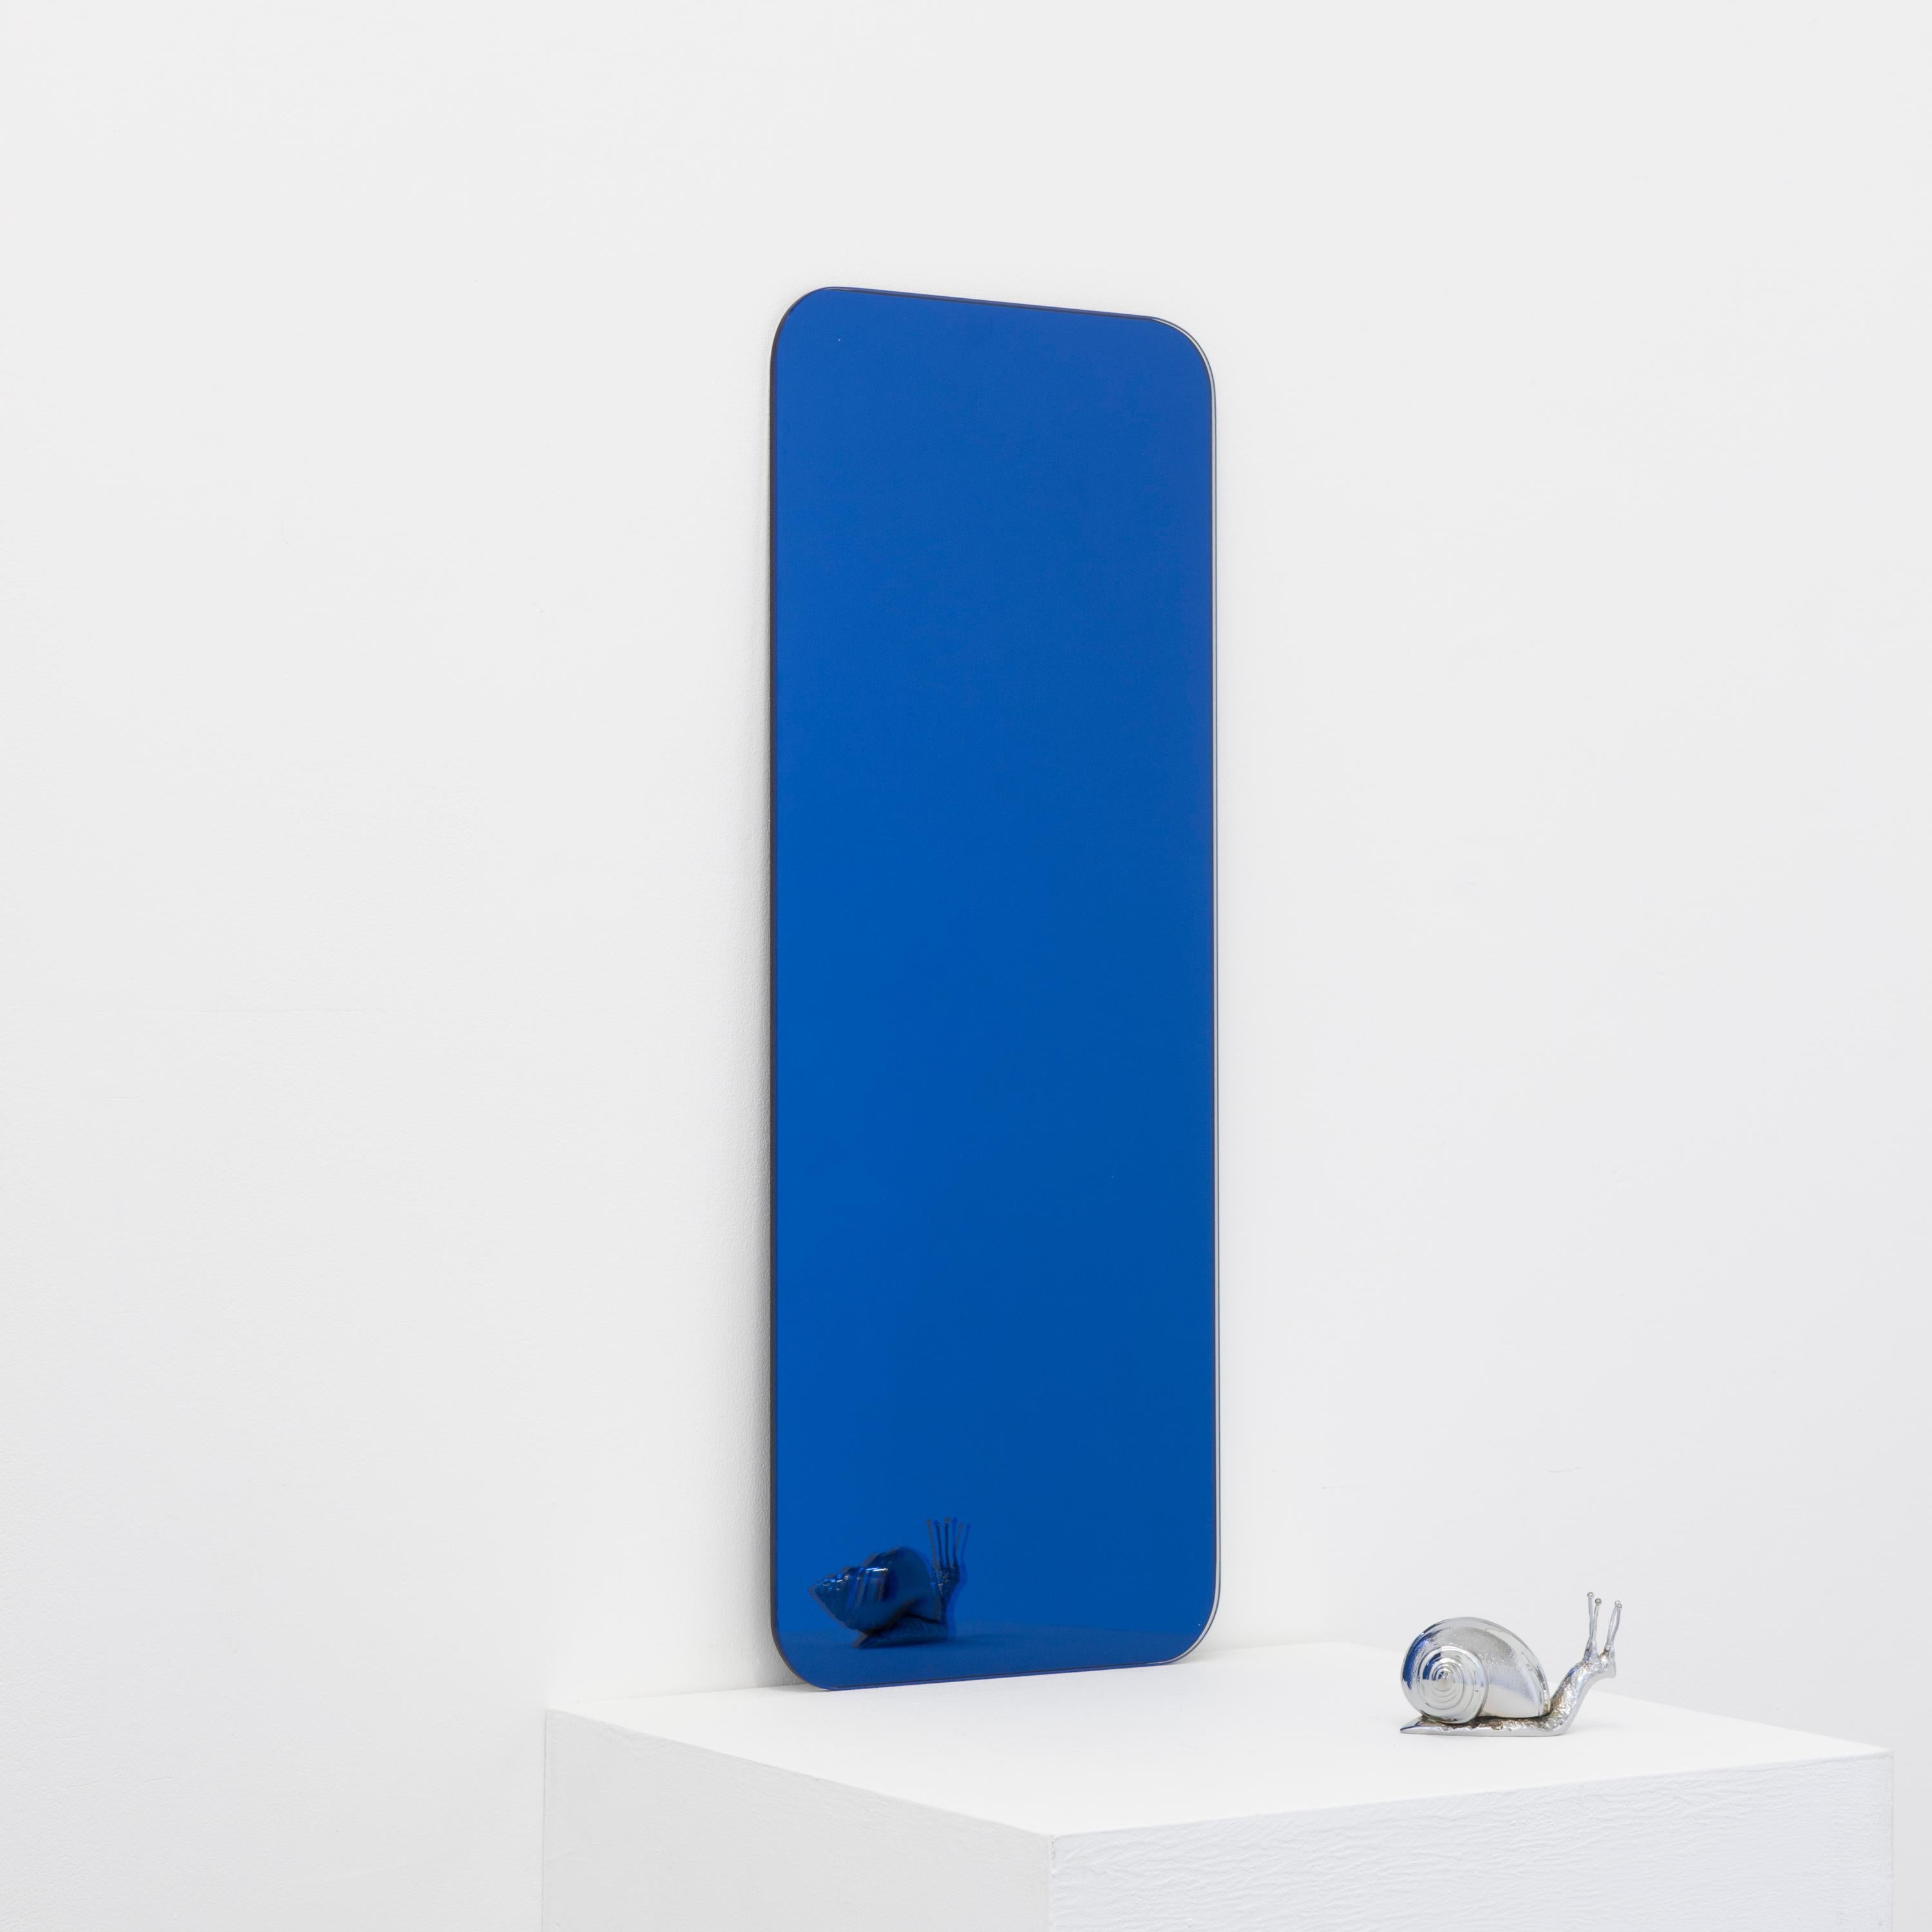 This mirror is available from stock.

Minimalist Quadris™ blue tinted rectangular frameless mirror with floating effect. Quality design that ensures the mirror sits perfectly parallel to the wall. Designed and made in London, UK.

Fitted with